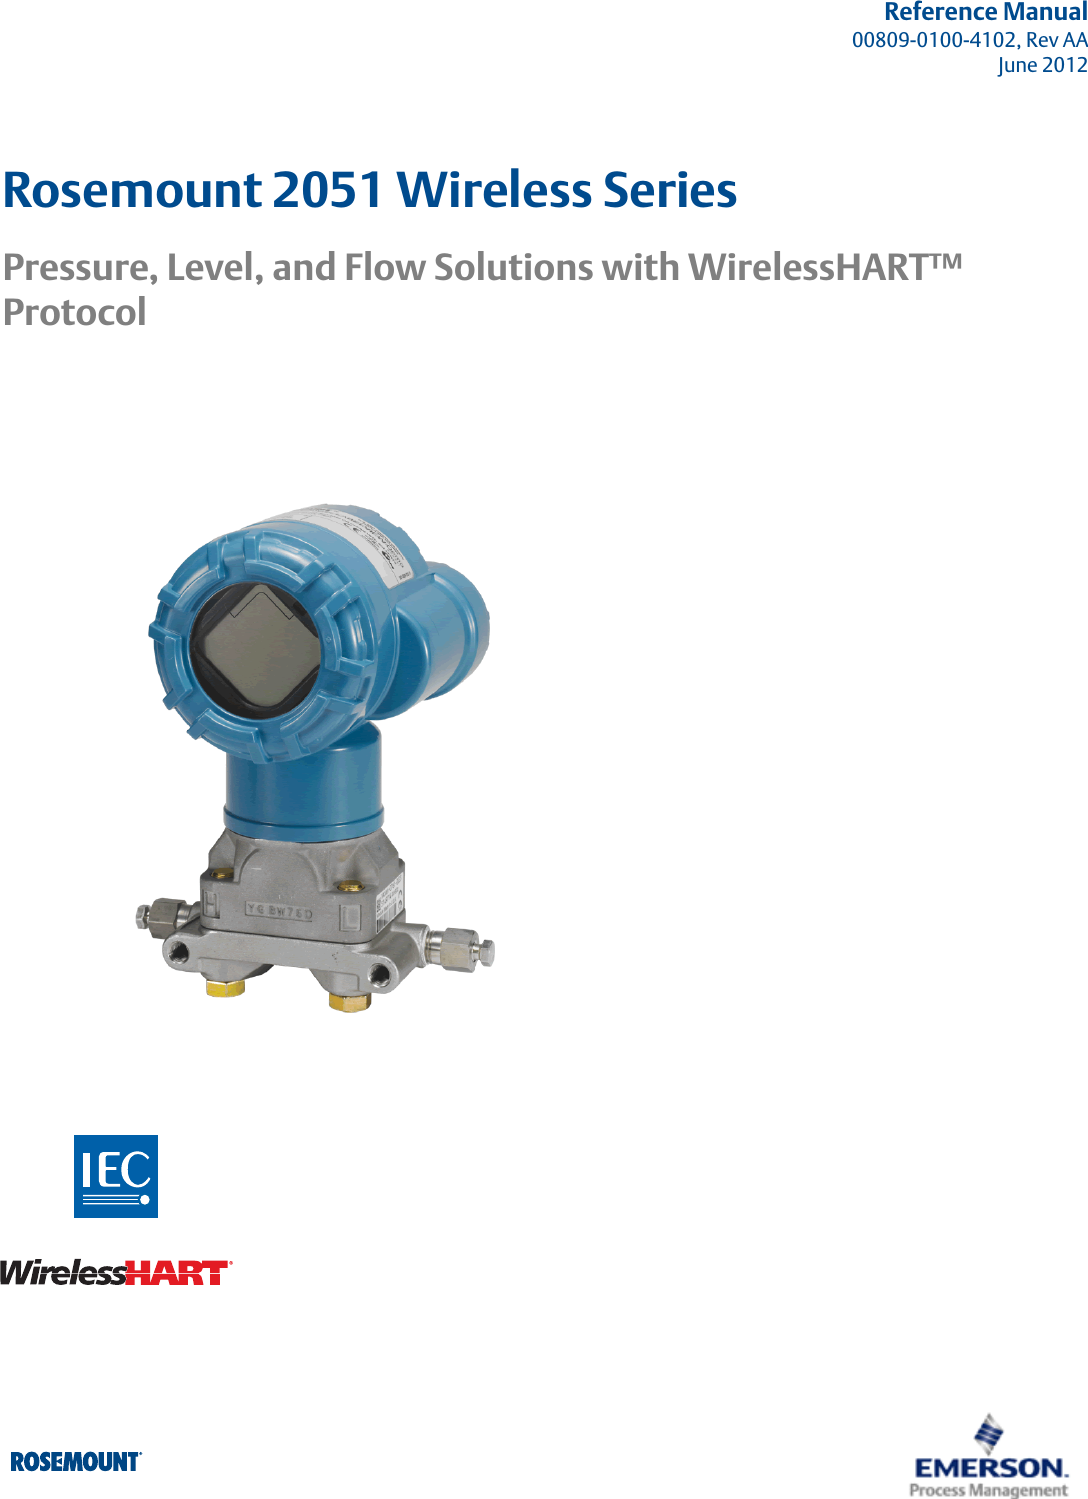 Reference Manual00809-0100-4102, Rev AAJune 2012Rosemount 2051 Wireless SeriesPressure, Level, and Flow Solutions with WirelessHART™ Protocol